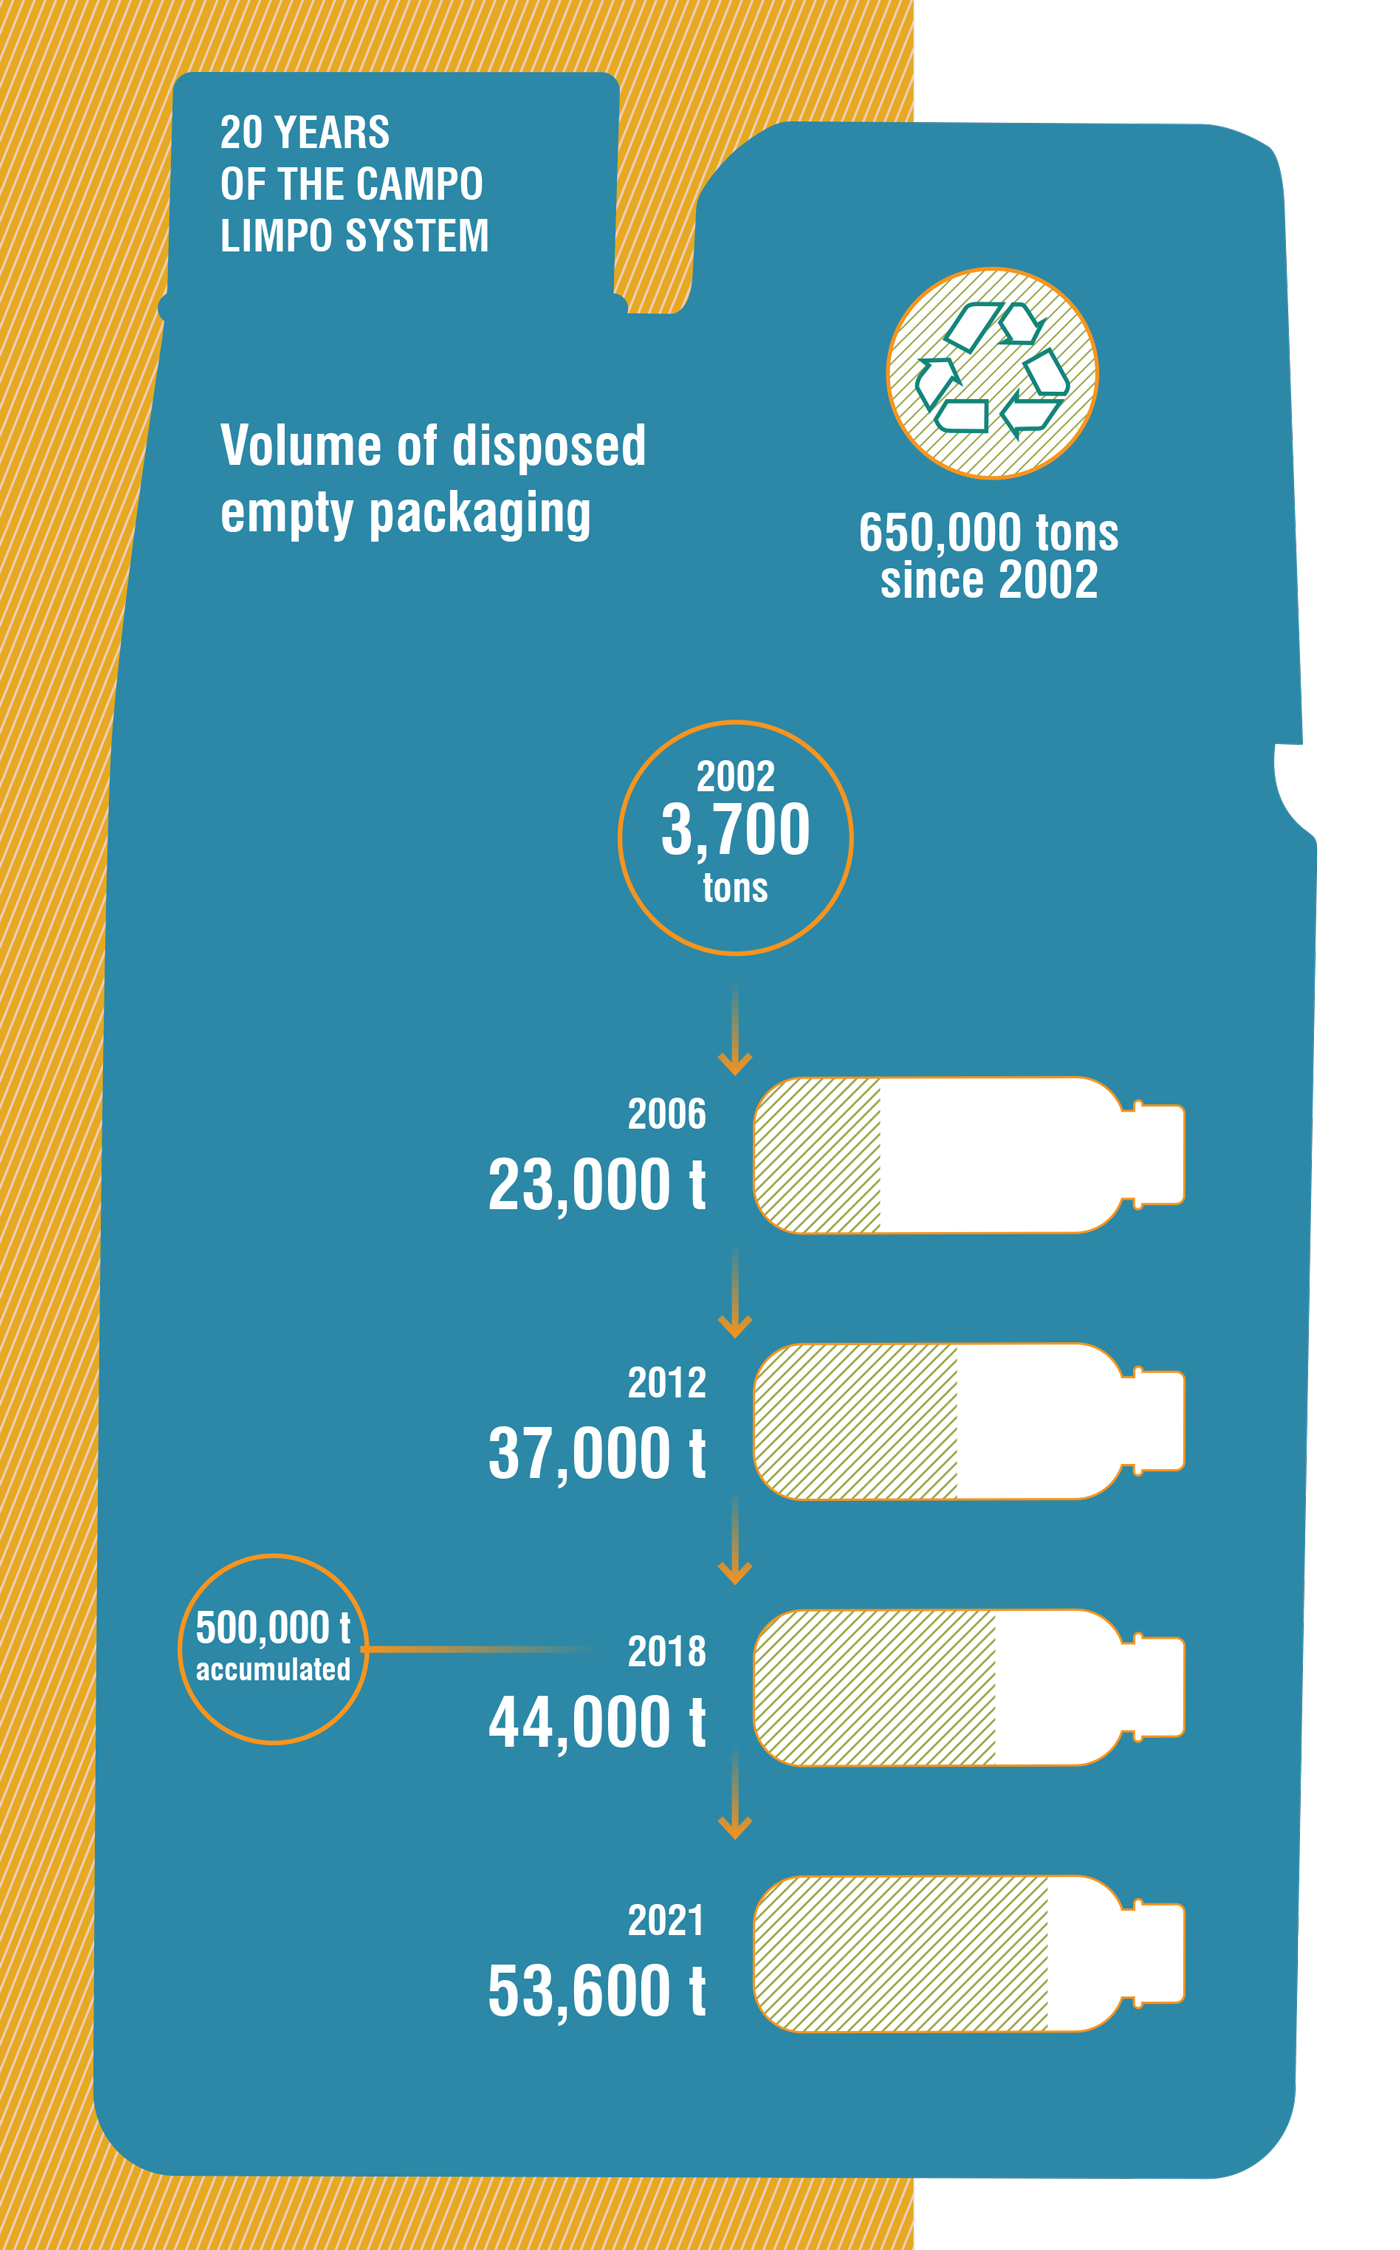 20 YEARS OF THE CAMPO LIMPO SYSTEM Volume of disposed empty packaging 650,000 tons since 2002 2002 3,700 tons 2006 23,000t  2012 37,000t 2018 44,000t 500,000t accumulated 2021 53, 600t